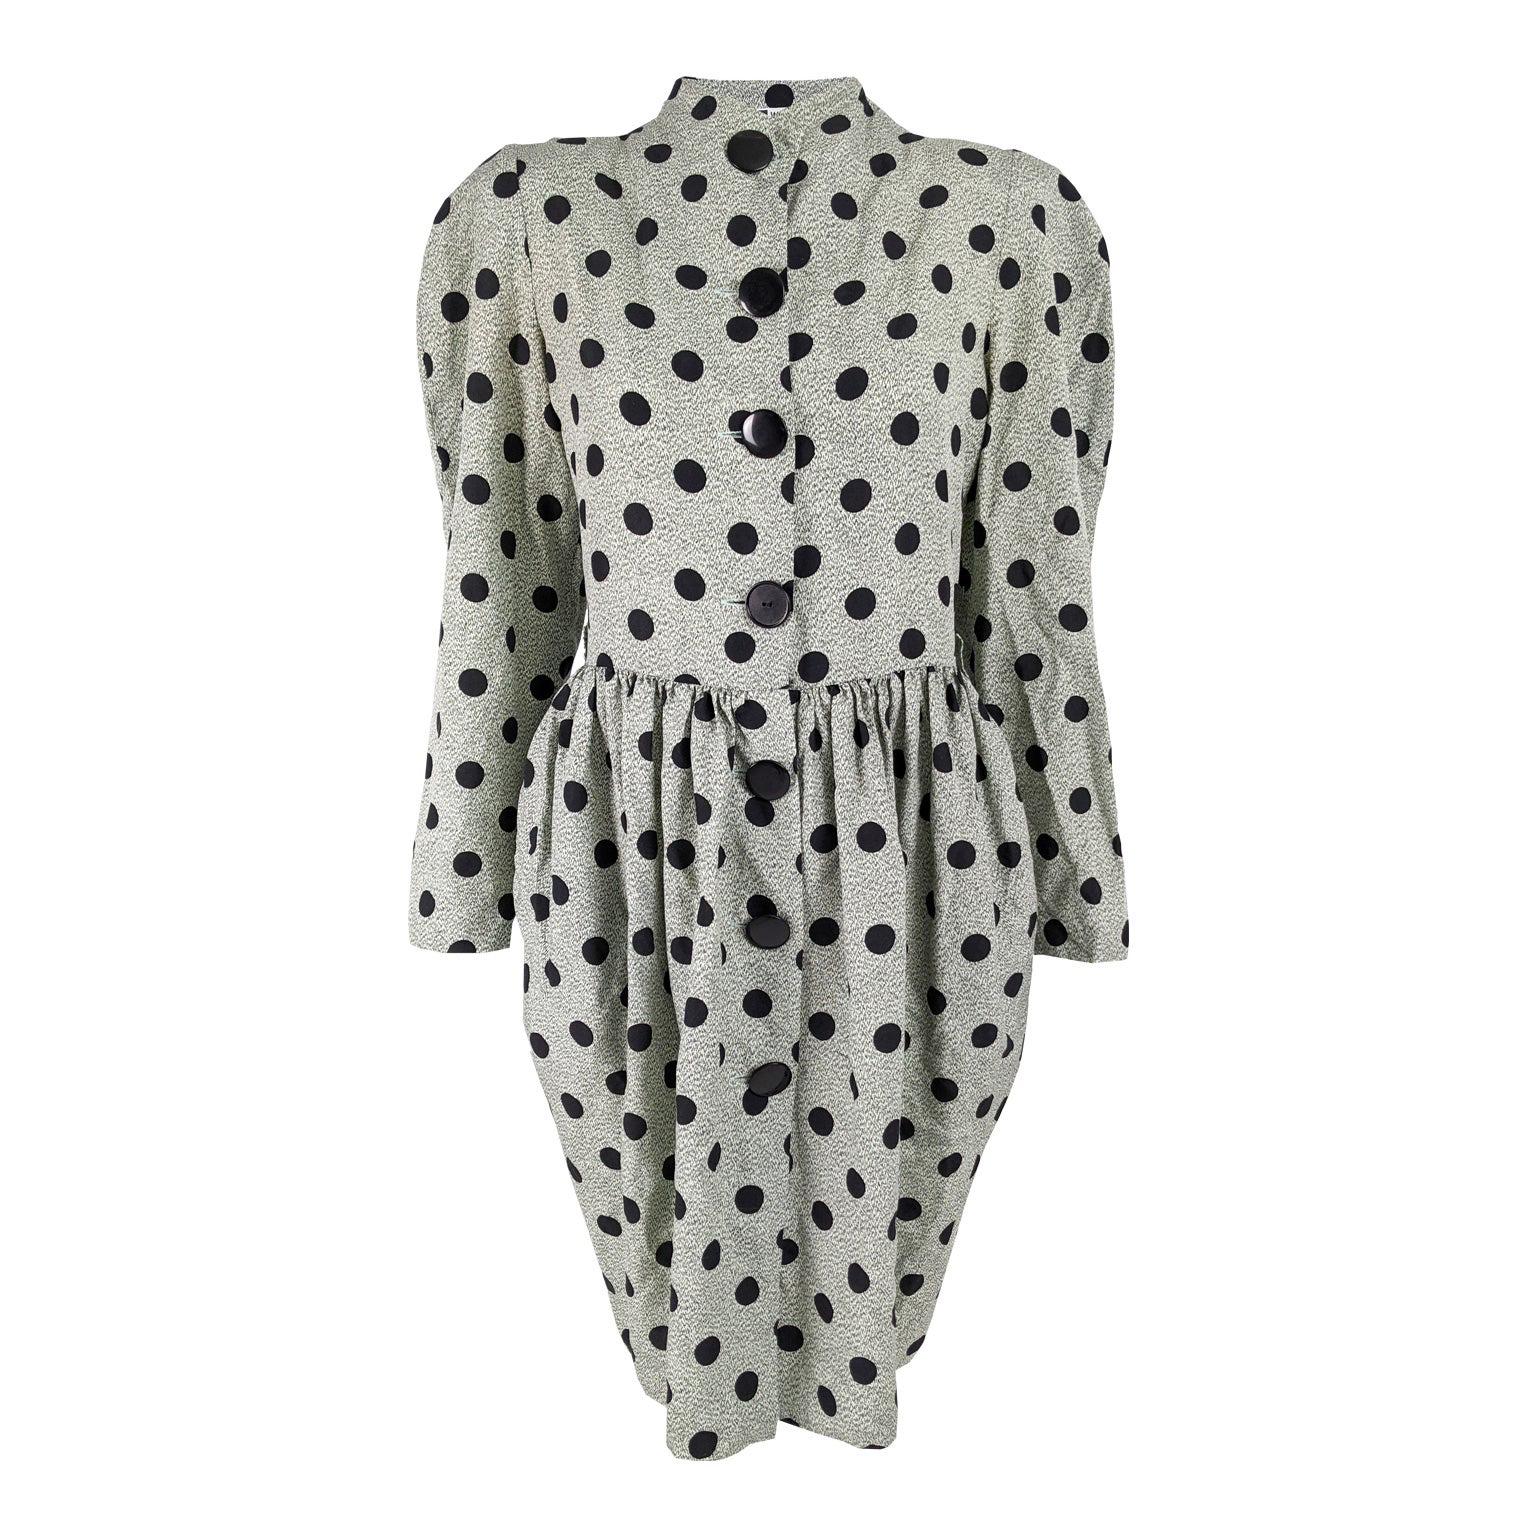 Williwear by Willi Smith Vintage Documented Polka Dot Dress, 1984 For Sale